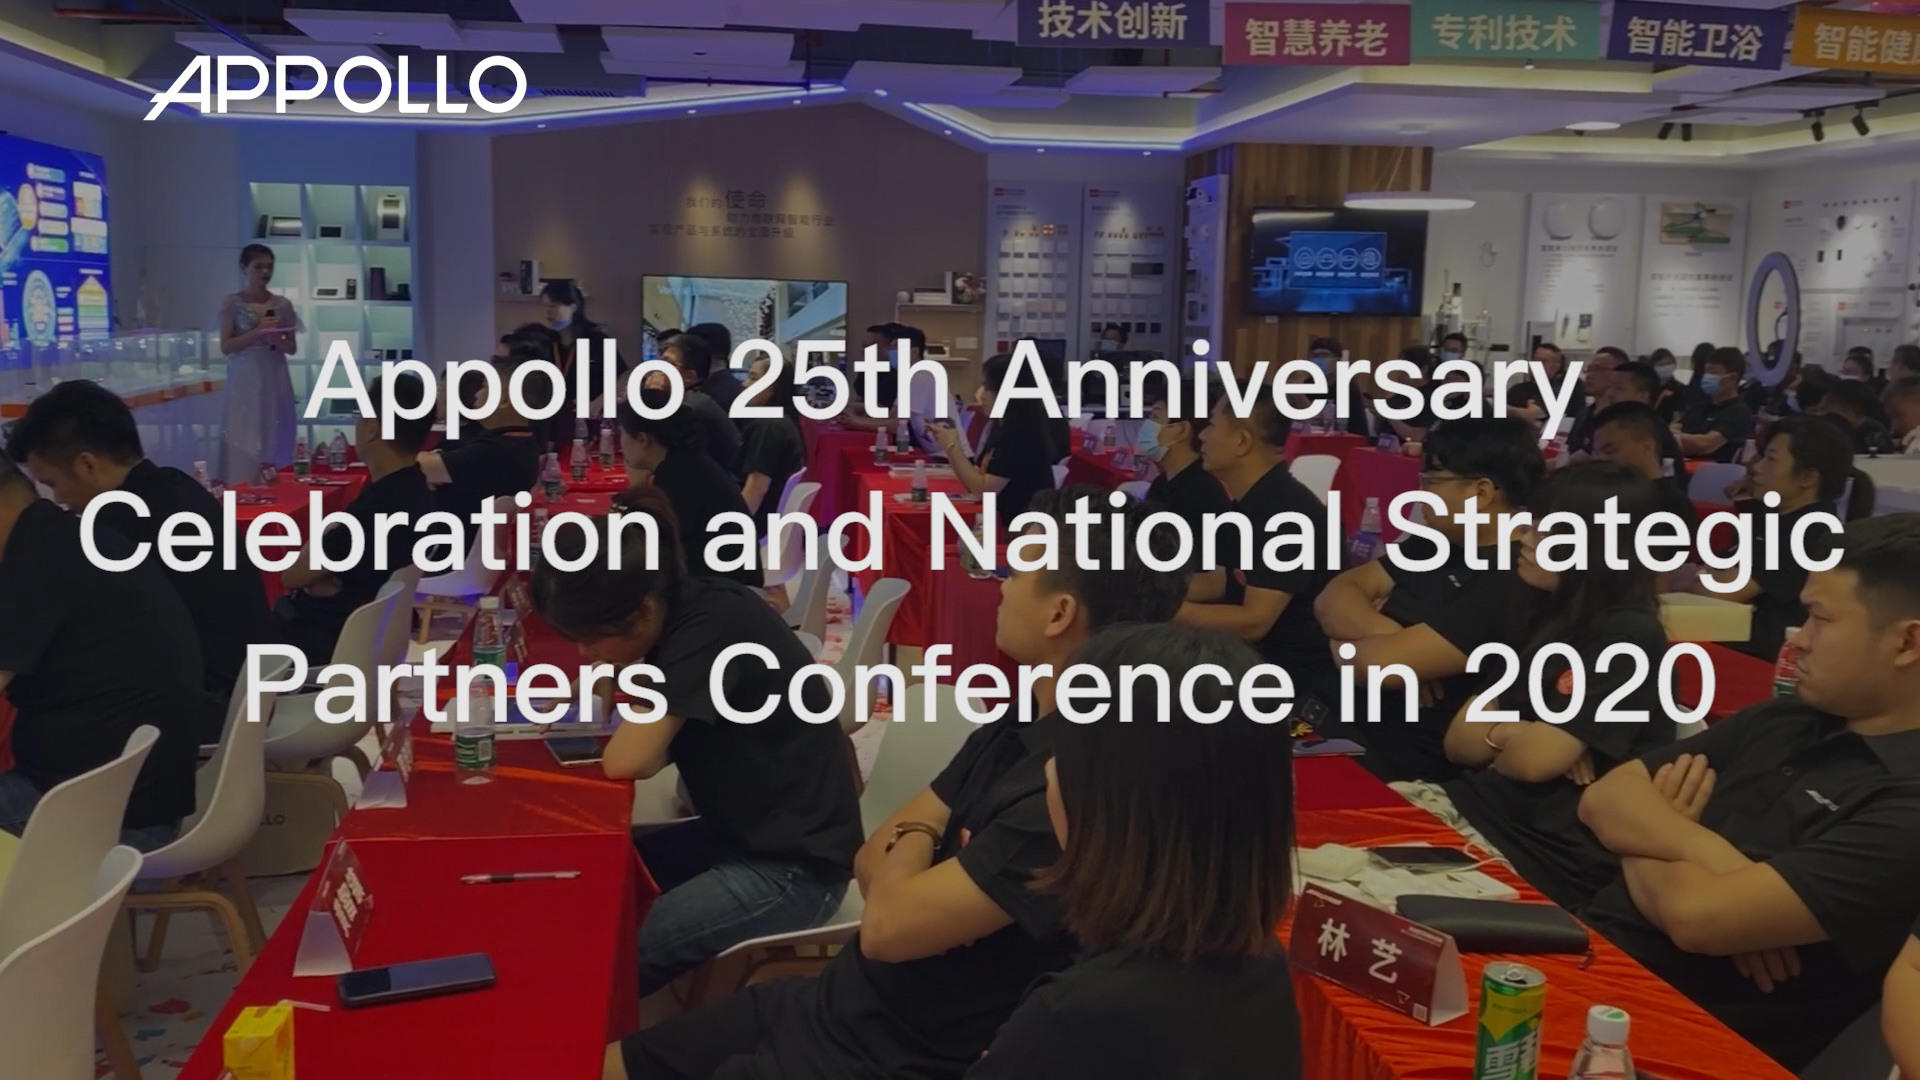 National Strategic Partners Conference in 2020